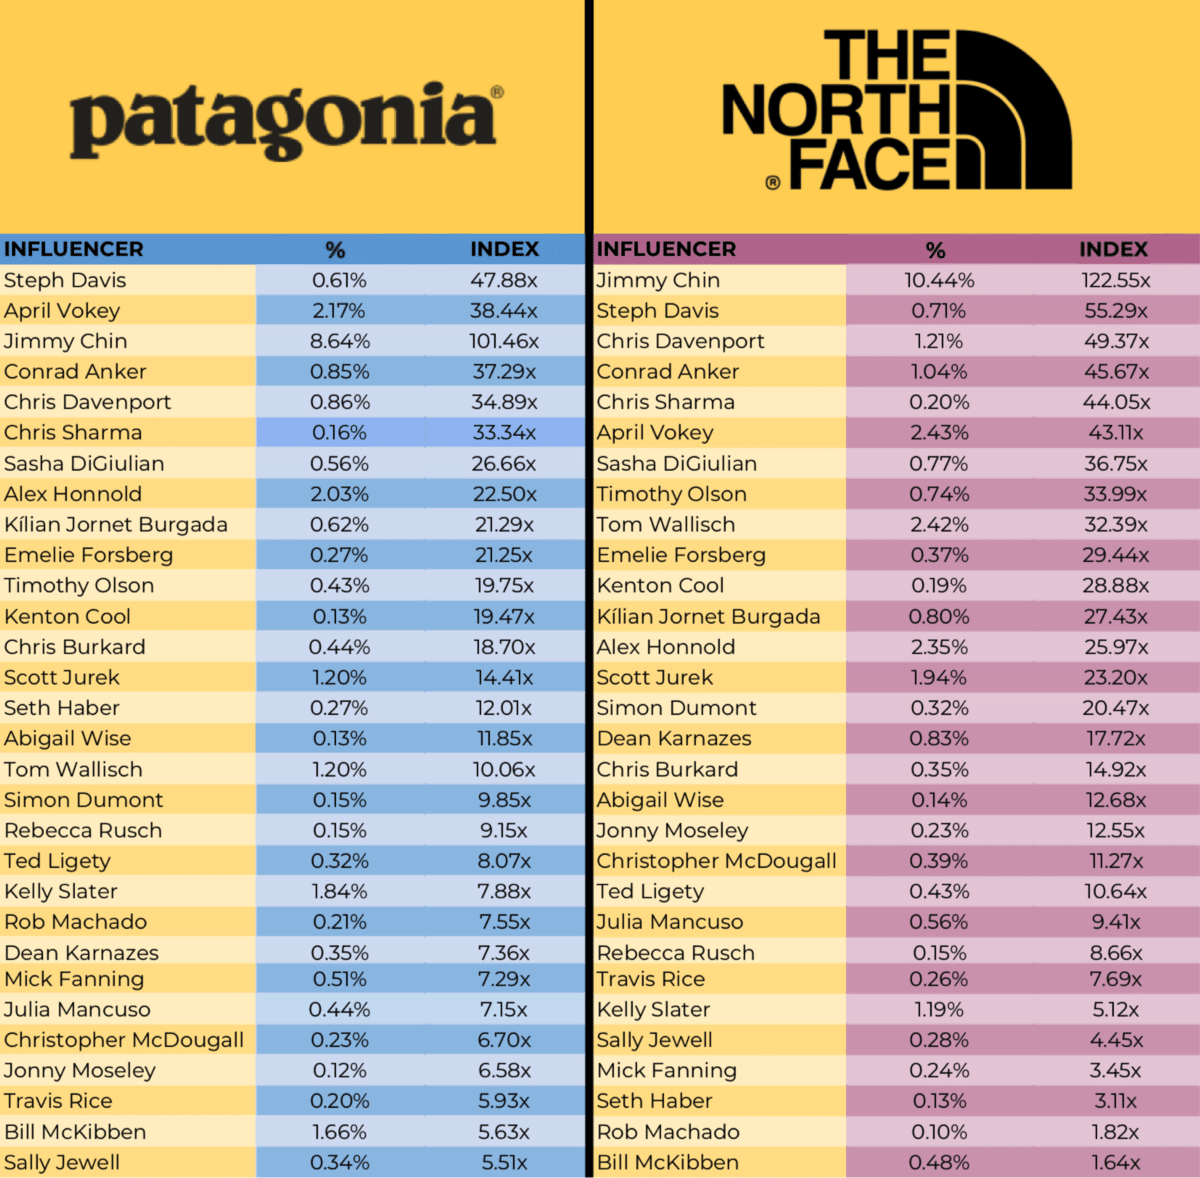 The North Face vs. Patagonia Customers 